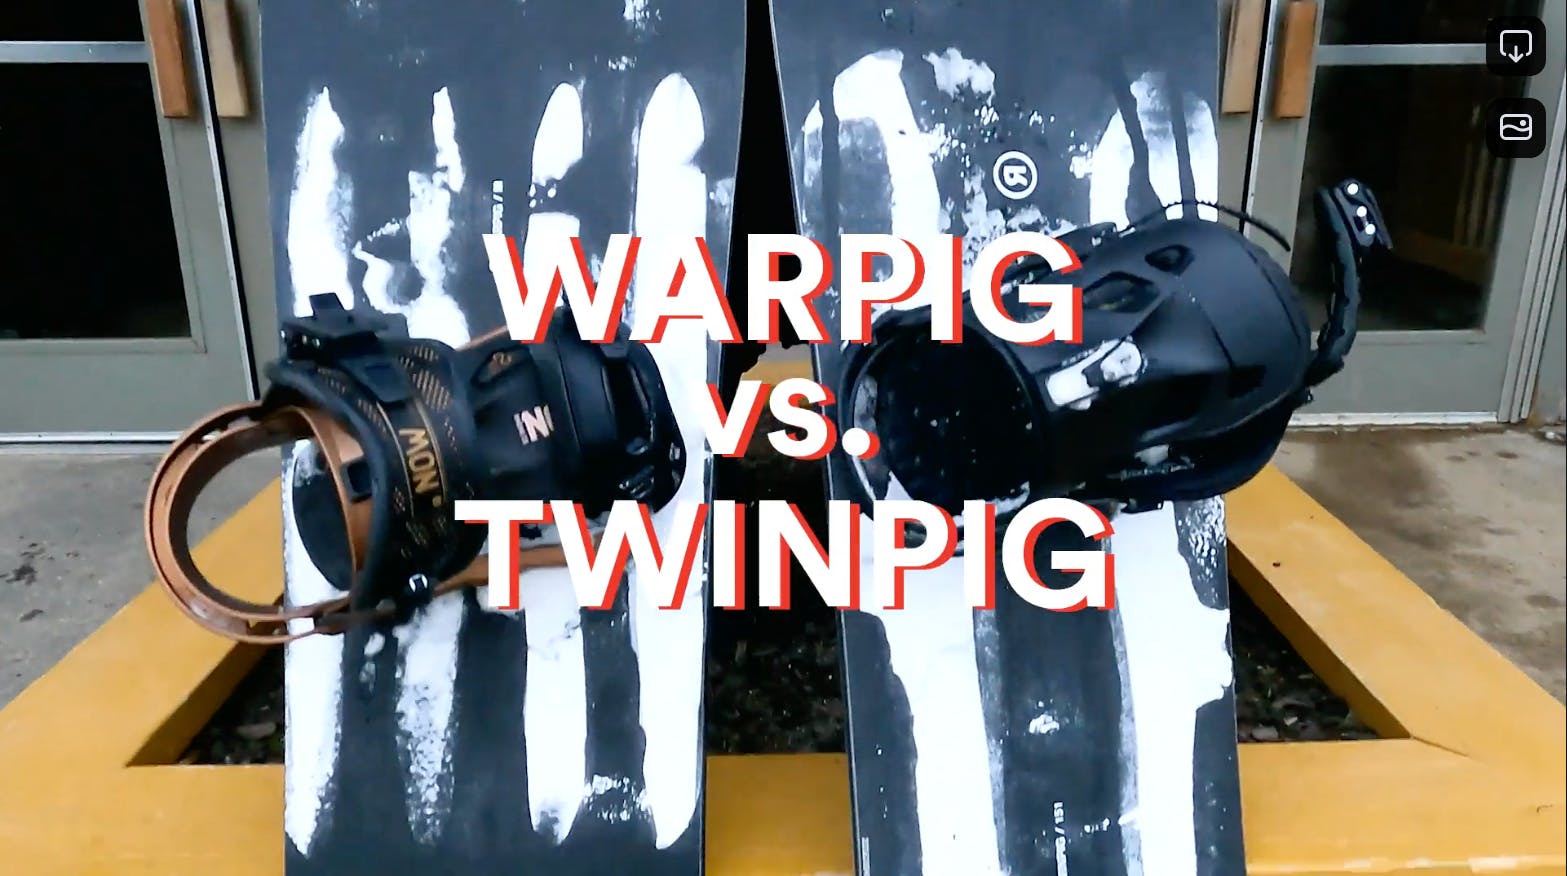 The Ride Warpig and Twinpig snowboards side by side with a "Warpig vs. Twinpig" graphic over the image